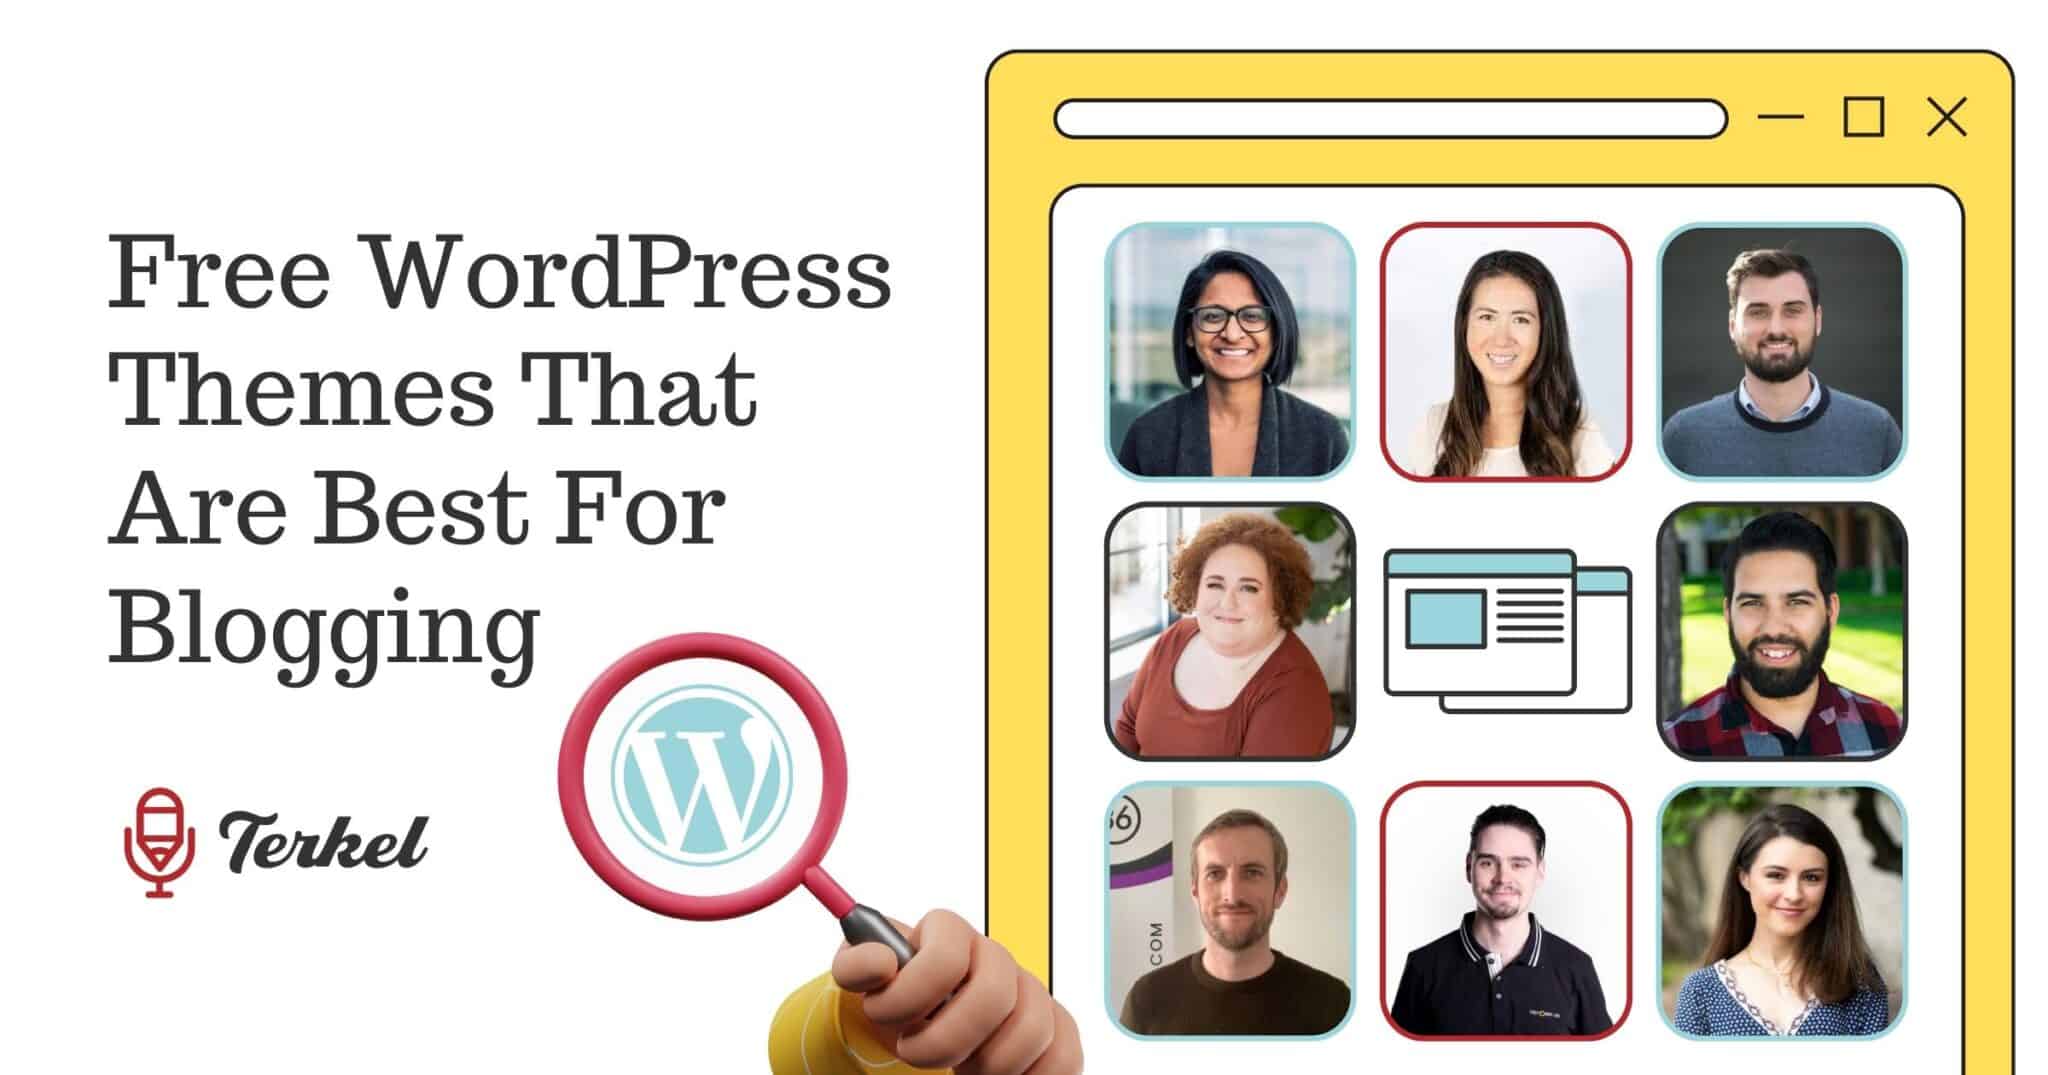 Free WordPress Themes That Are Best For Blogging